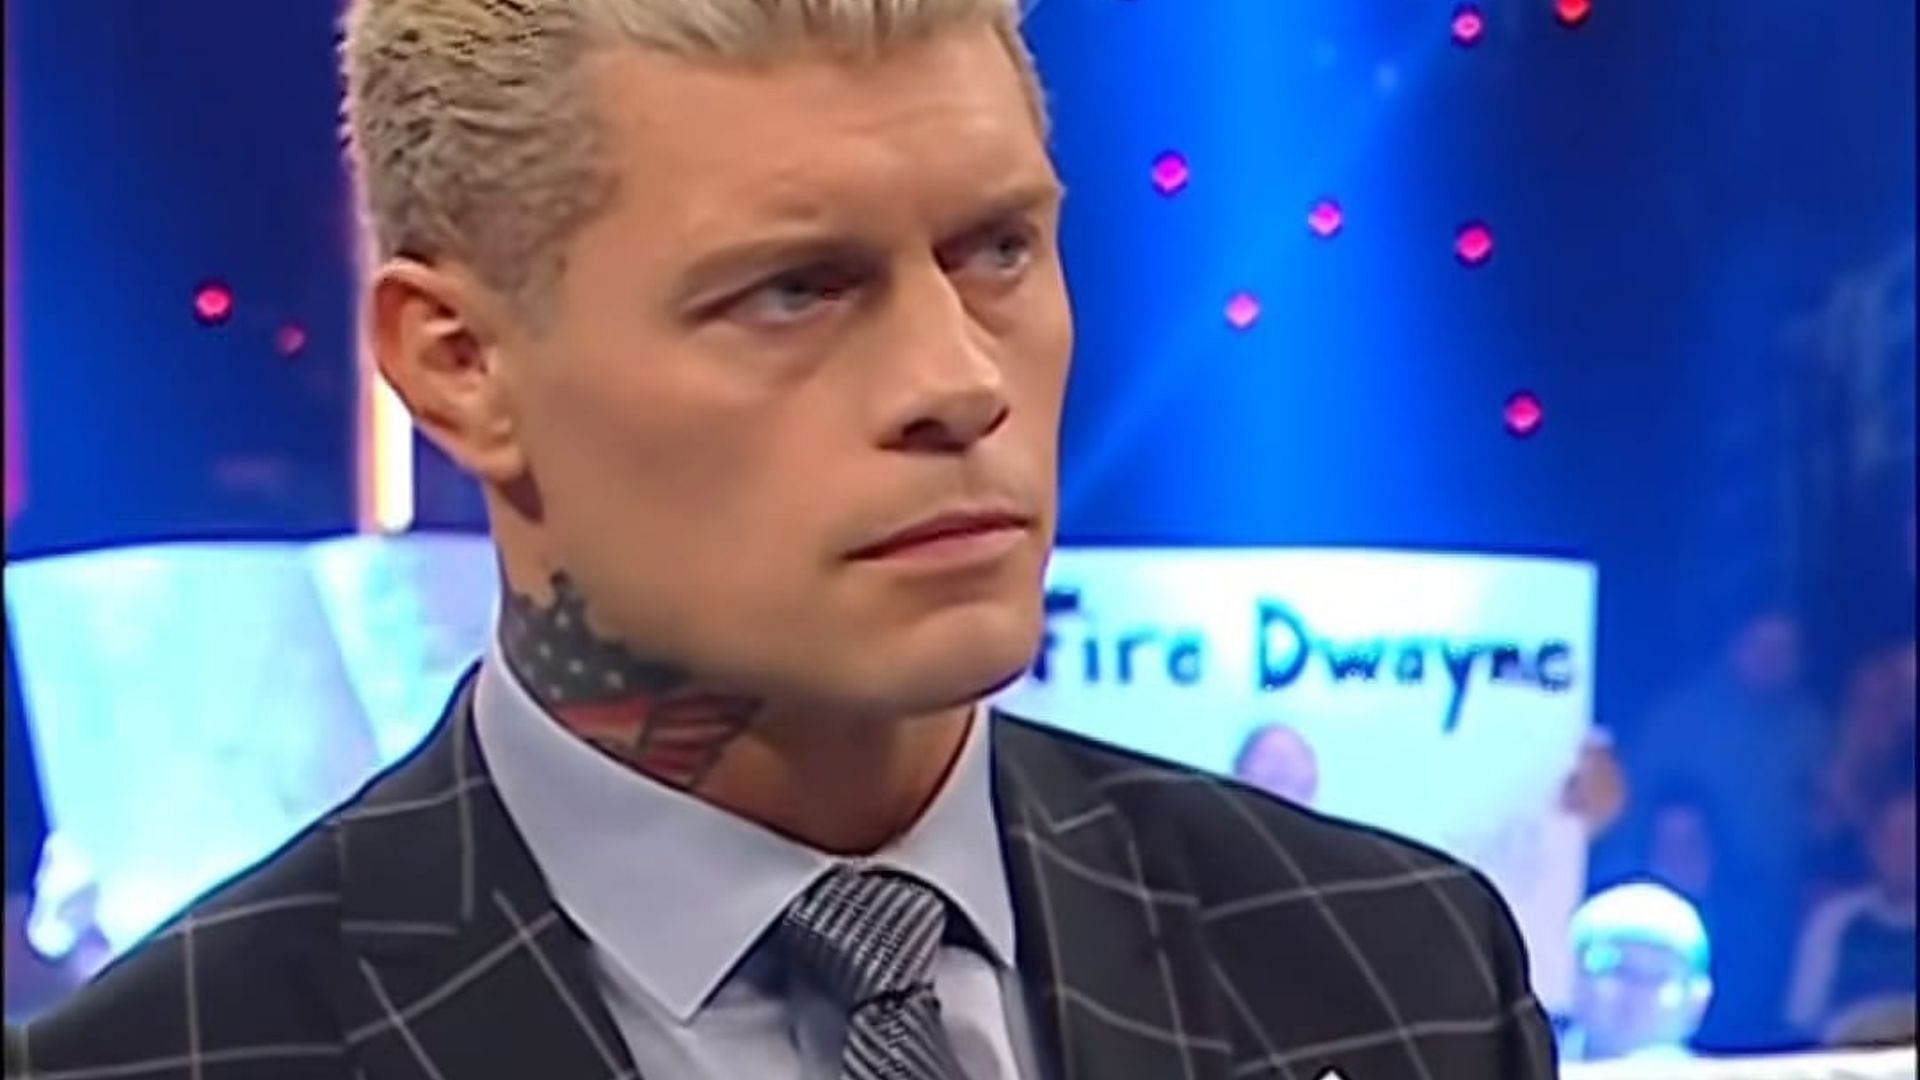 Cody Rhodes is the most popular babyface in WWE today.